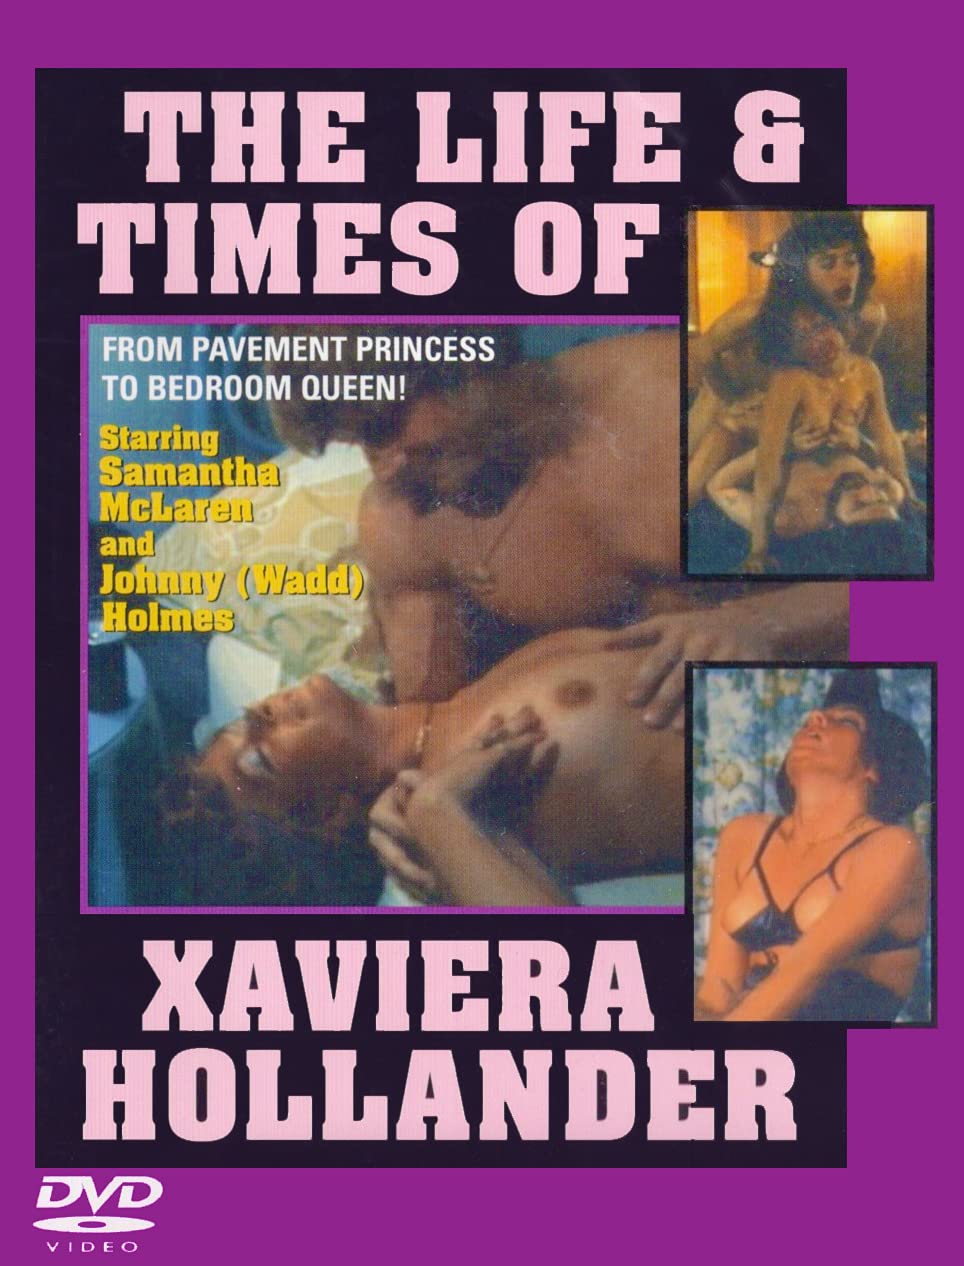 THE LIFE AND TIMES OF XAVIERA HOLLANDER DVD